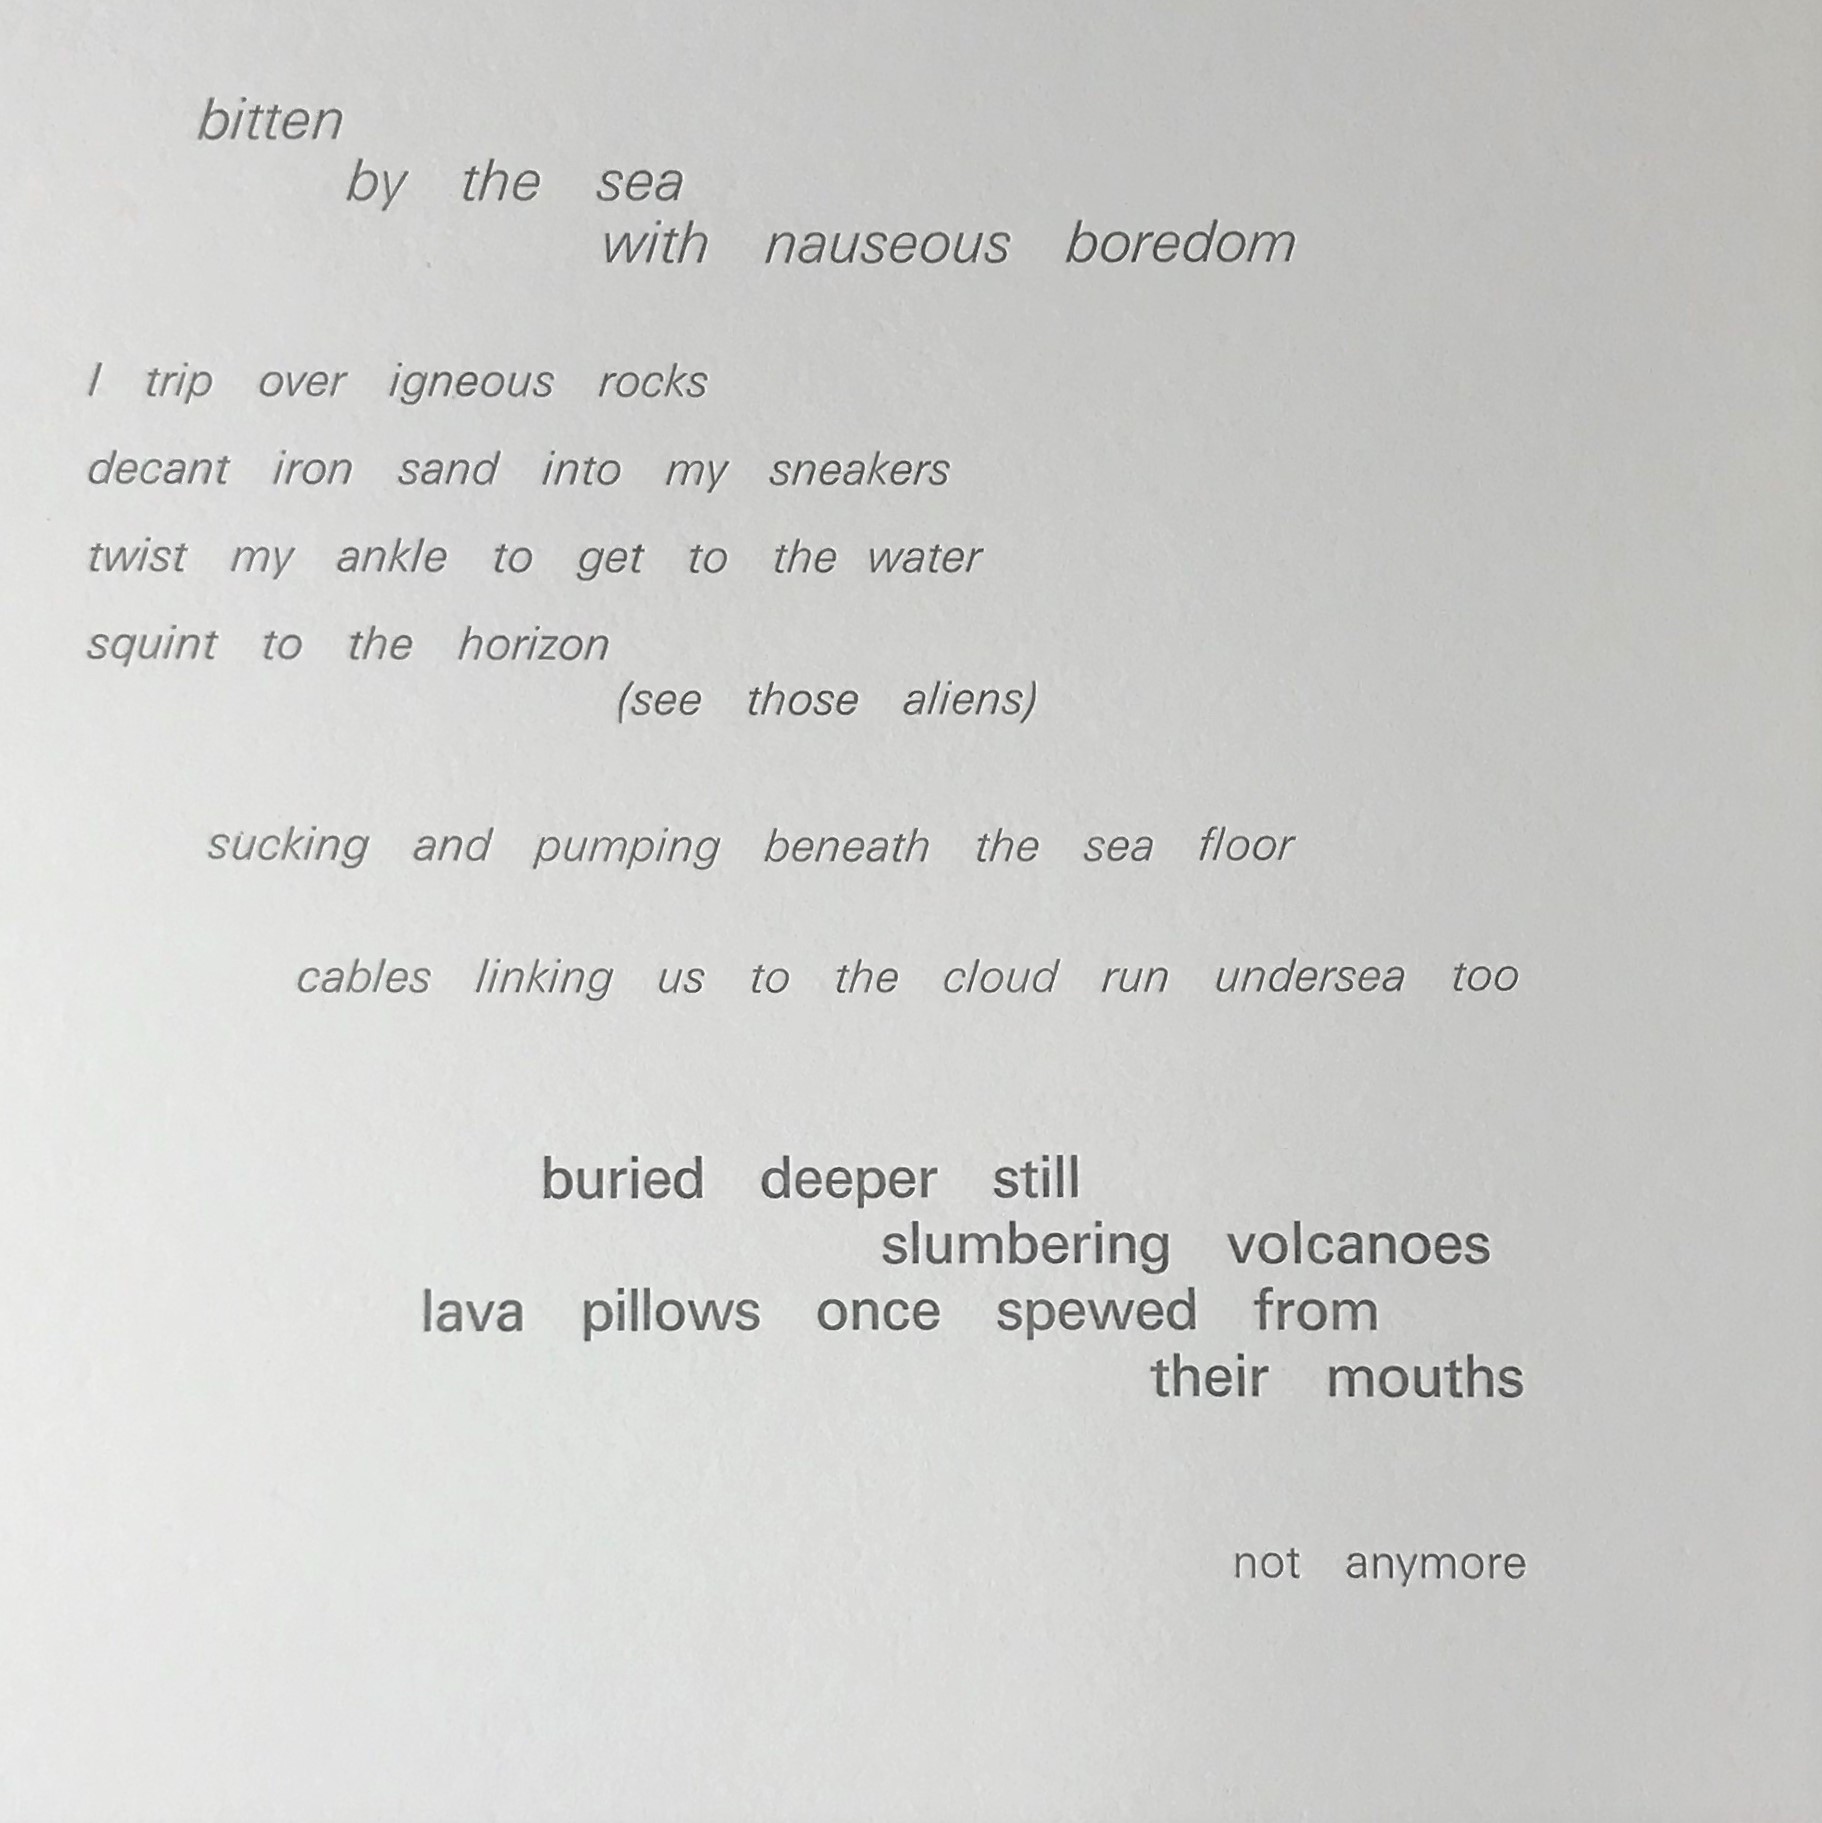 A poem made with old fashioned typeset letters. Ink is a dark grey and is embossed onto a thick ivory paper. Some words have been redacted by using the flat end of the intended letter block. The left margin slopes creating a slight parallelogram shaped block of text. The poem reads: Bitten by the sea with nauseous boredom I trip over igneous rocks decant iron sand into my sneakers twist my ankle to get to the water squint to the horizon (see those aliens) sucking and pumping beneath the sea floor cables linking us to the cloud run undersea too buried deeper still slumbering volcanoes lava pillows once spewed from their mouths not anymore